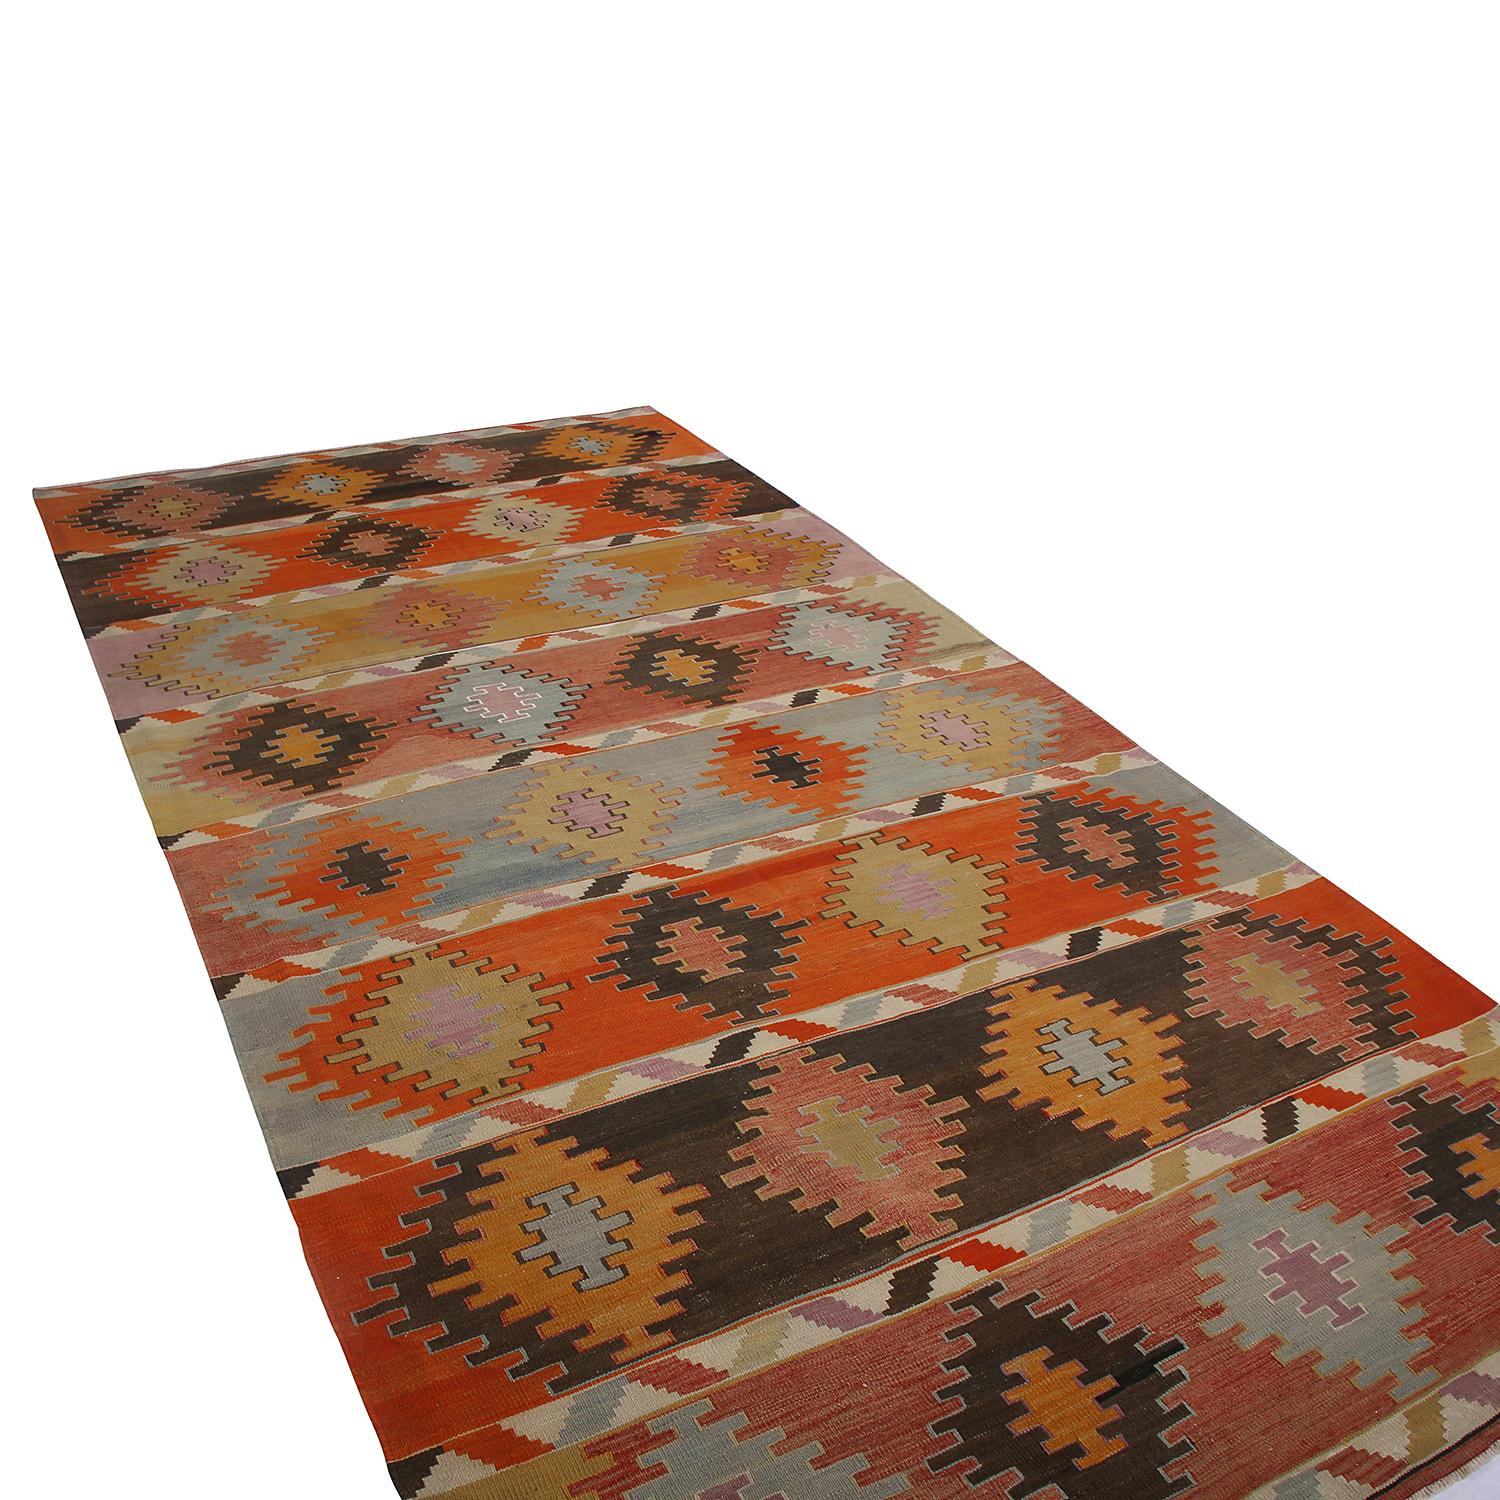 Handwoven in Turkey originating between 1950-1960, this vintage midcentury 6 x 11 wool Kilim hails from the Sivas province, a widely regarded locale of acclaimed Central Anatolian rarities. The lack of exact repetition in the rows of bright and